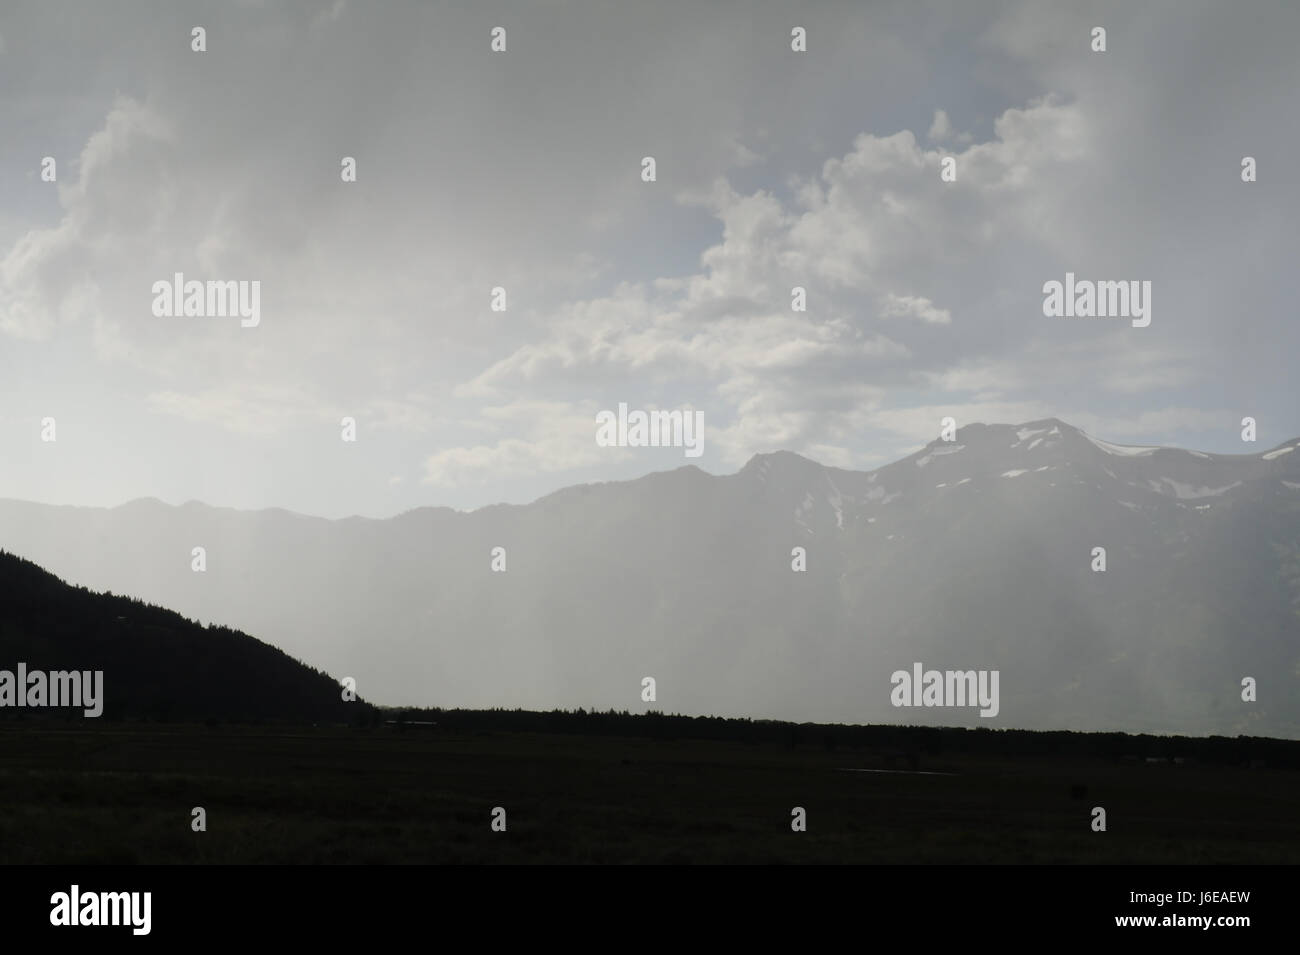 View through rain shower to South Teton peaks and silhouette West Gros Ventre Butte from Grand teton National Park Entrance Turnout, Wyoming, USA Stock Photo